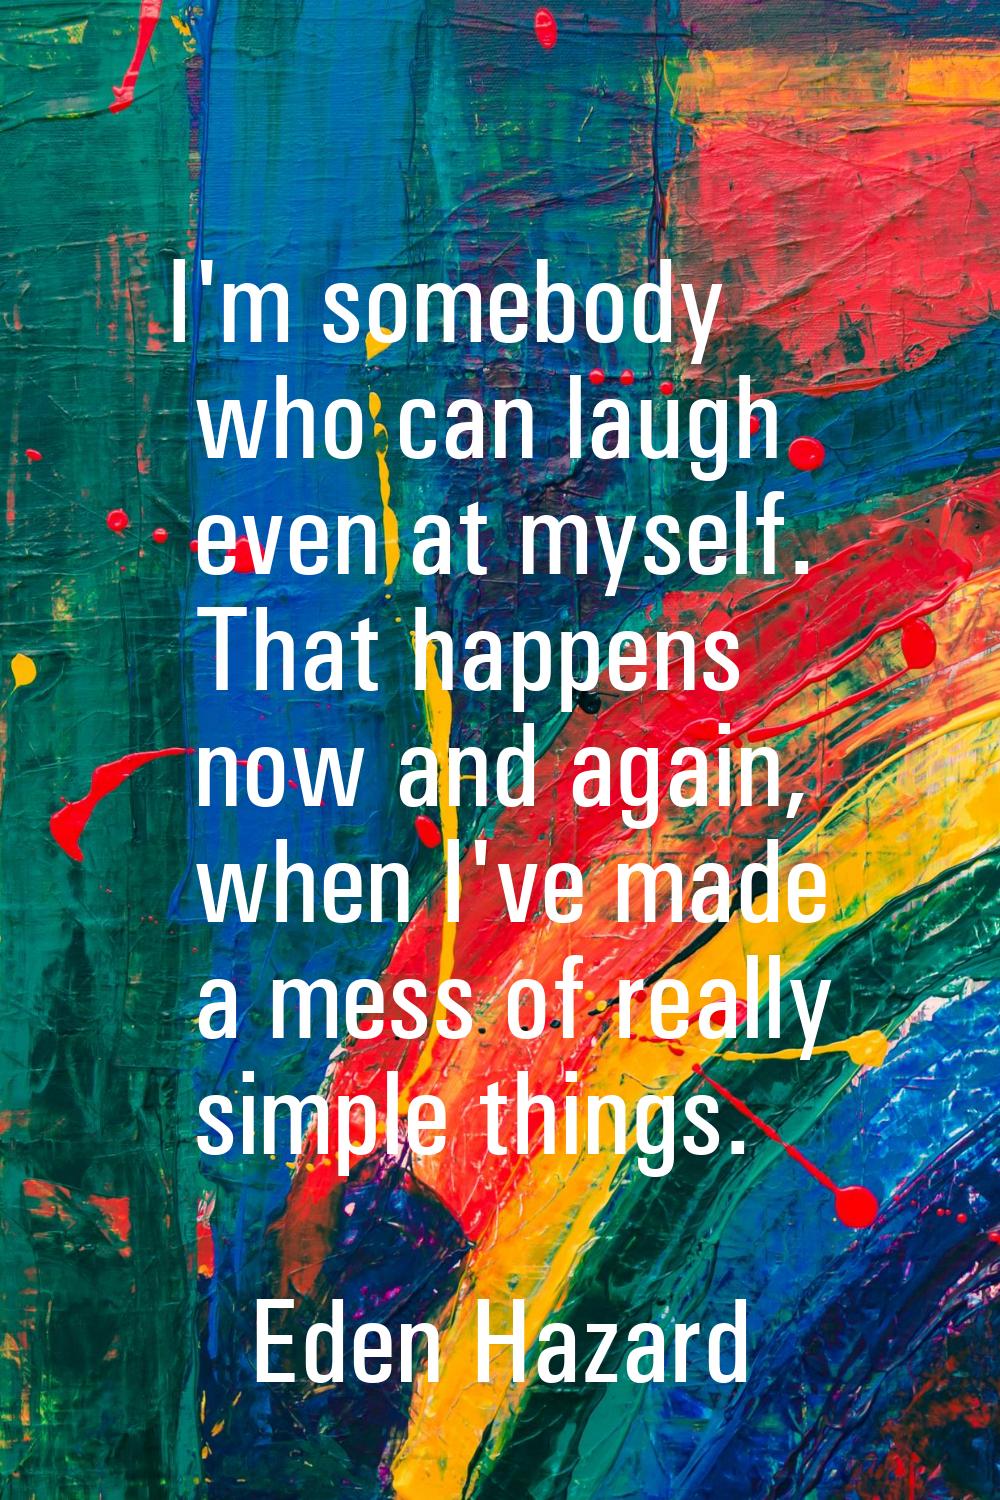 I'm somebody who can laugh even at myself. That happens now and again, when I've made a mess of rea